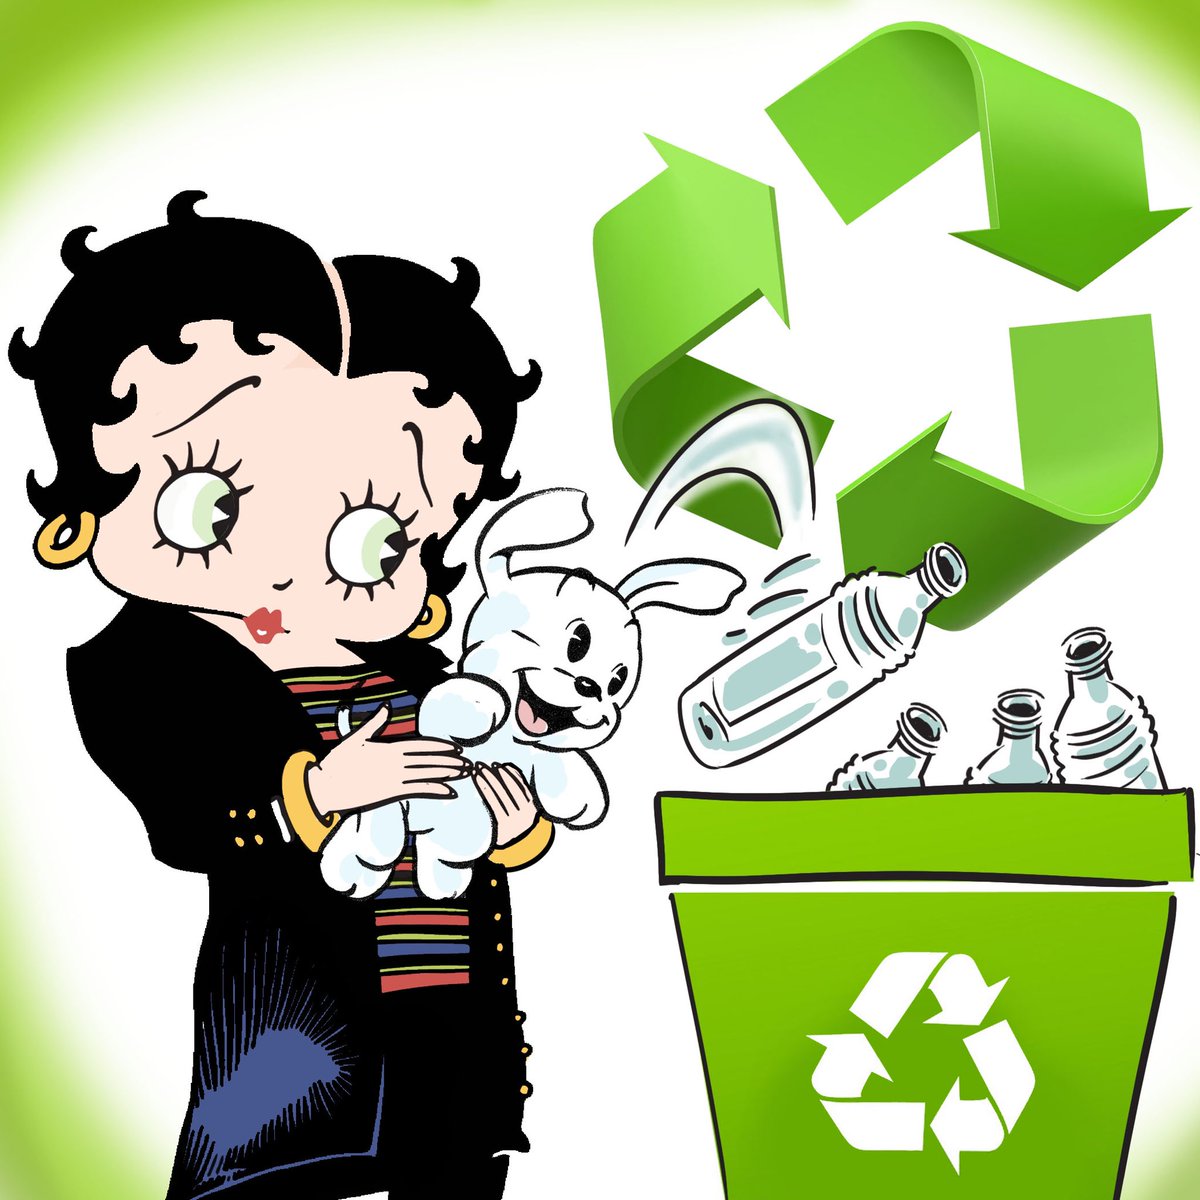 It’s #NationalRecyclingDay! Show the planet some extra #love by reusing and recycling! ❤️♻️ 
#AmericaRecyclesDay #booplove